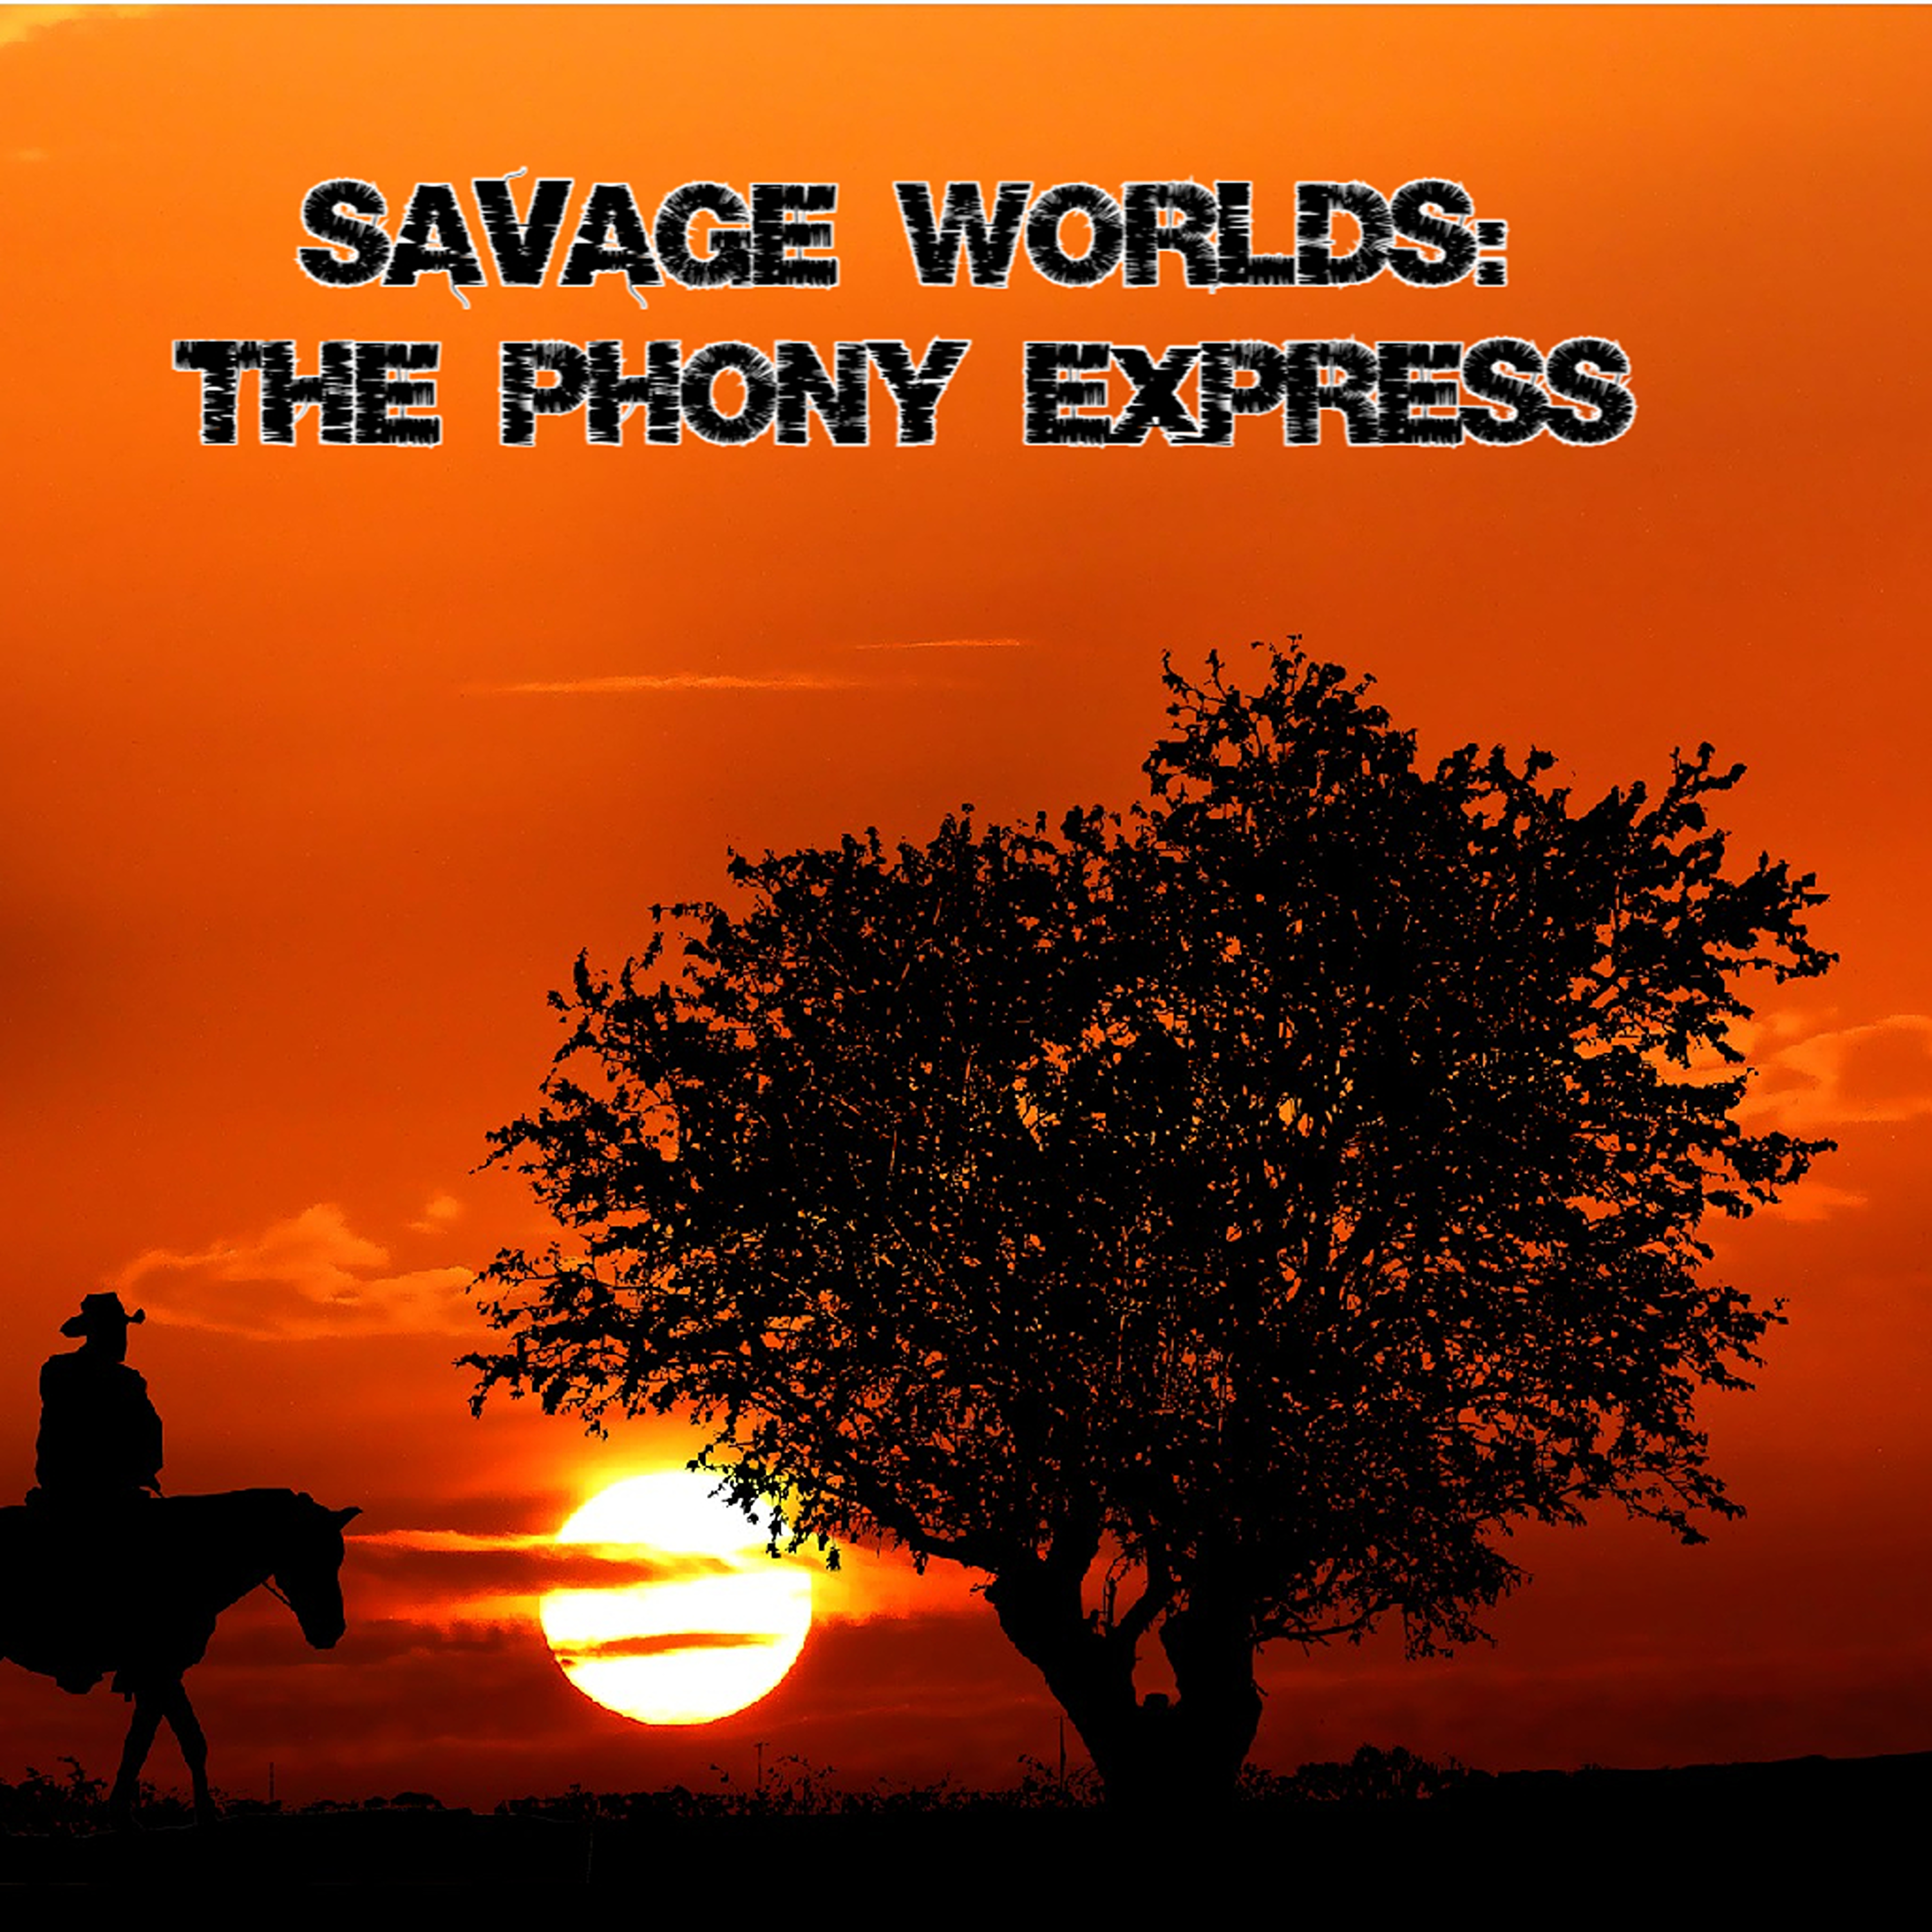 Savage Worlds - The Phony Express 2.4: The Evil Engine That Killed